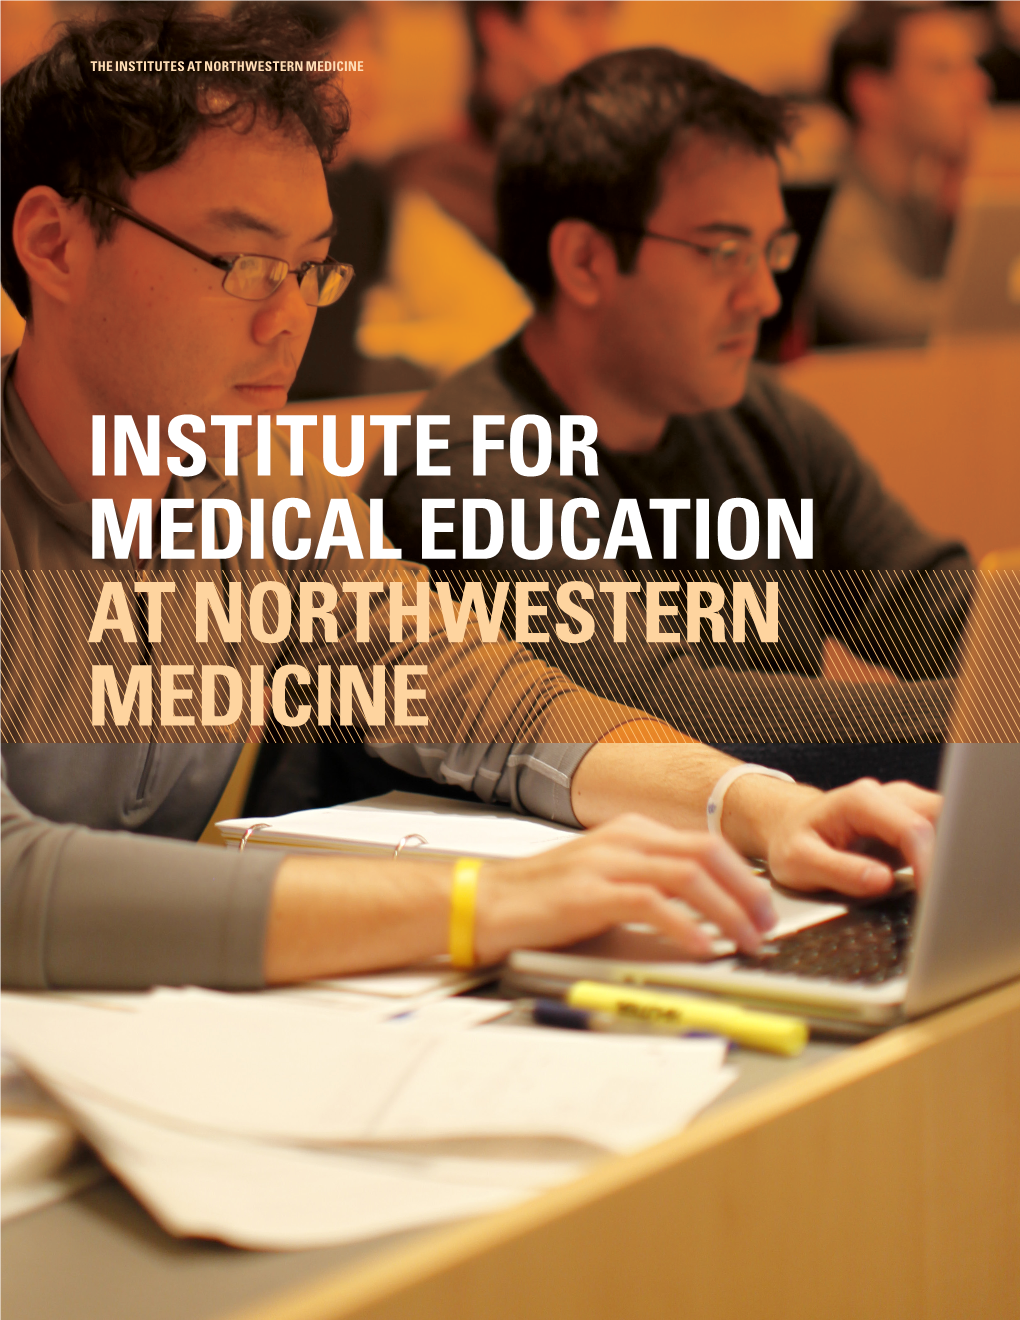 Institute for Medical Education at Northwestern Medicine the Institutes at Northwestern Medicine